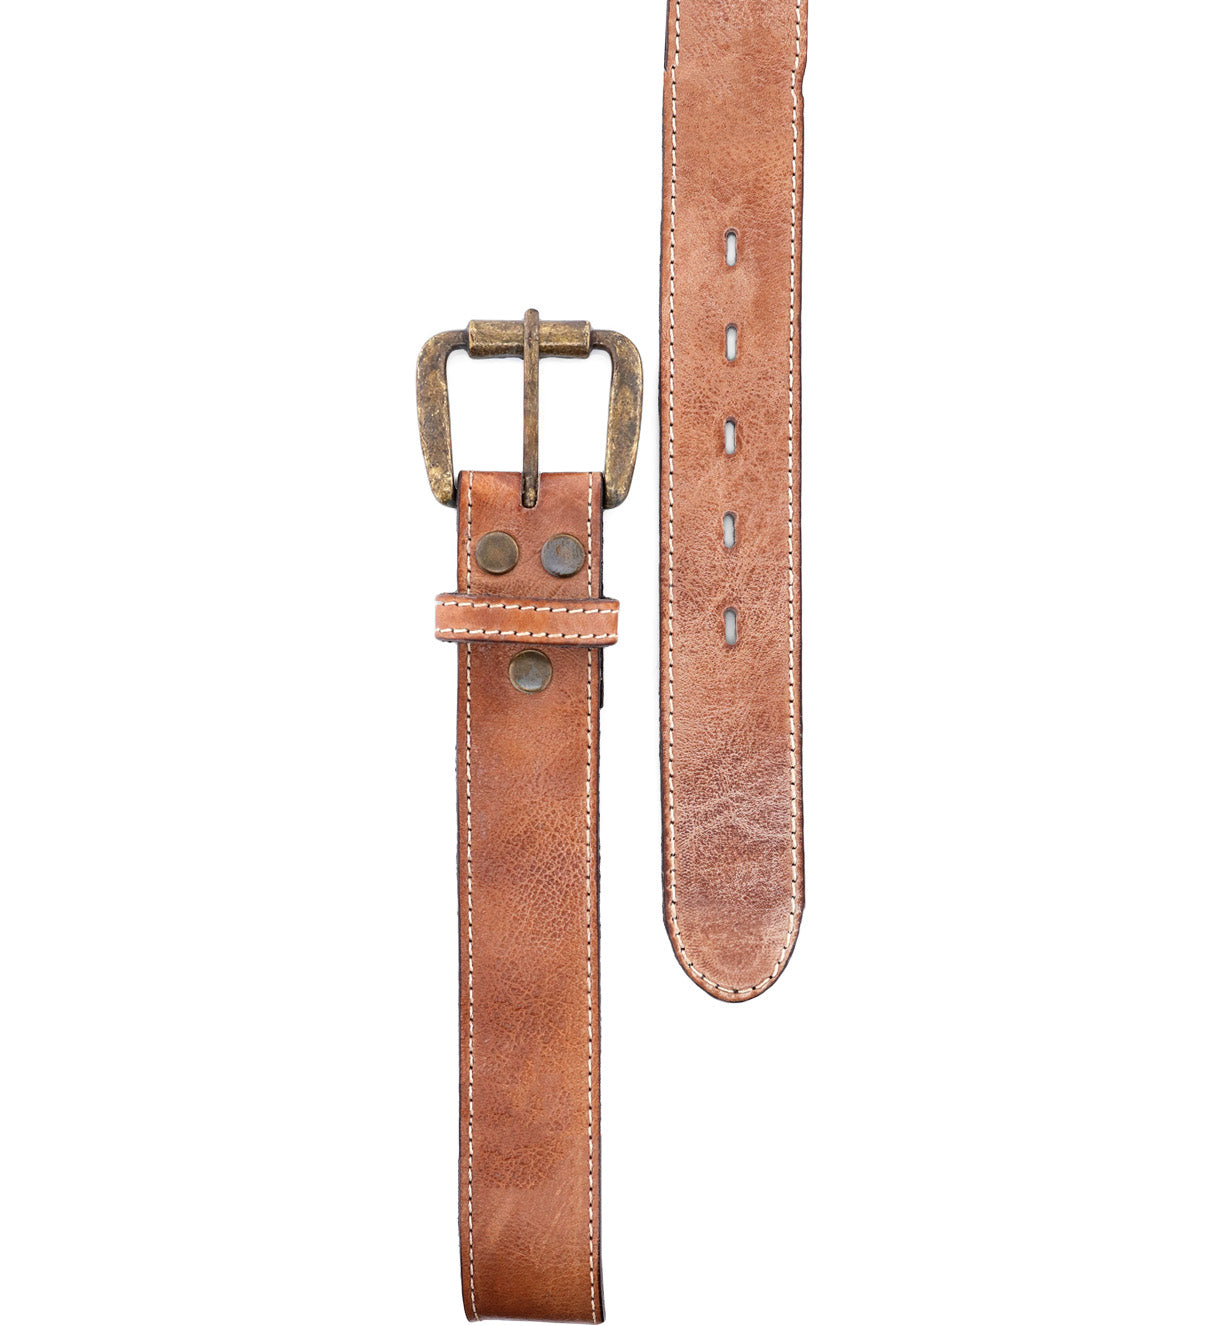 A Meander tan leather belt with a metal buckle by Bed Stu.